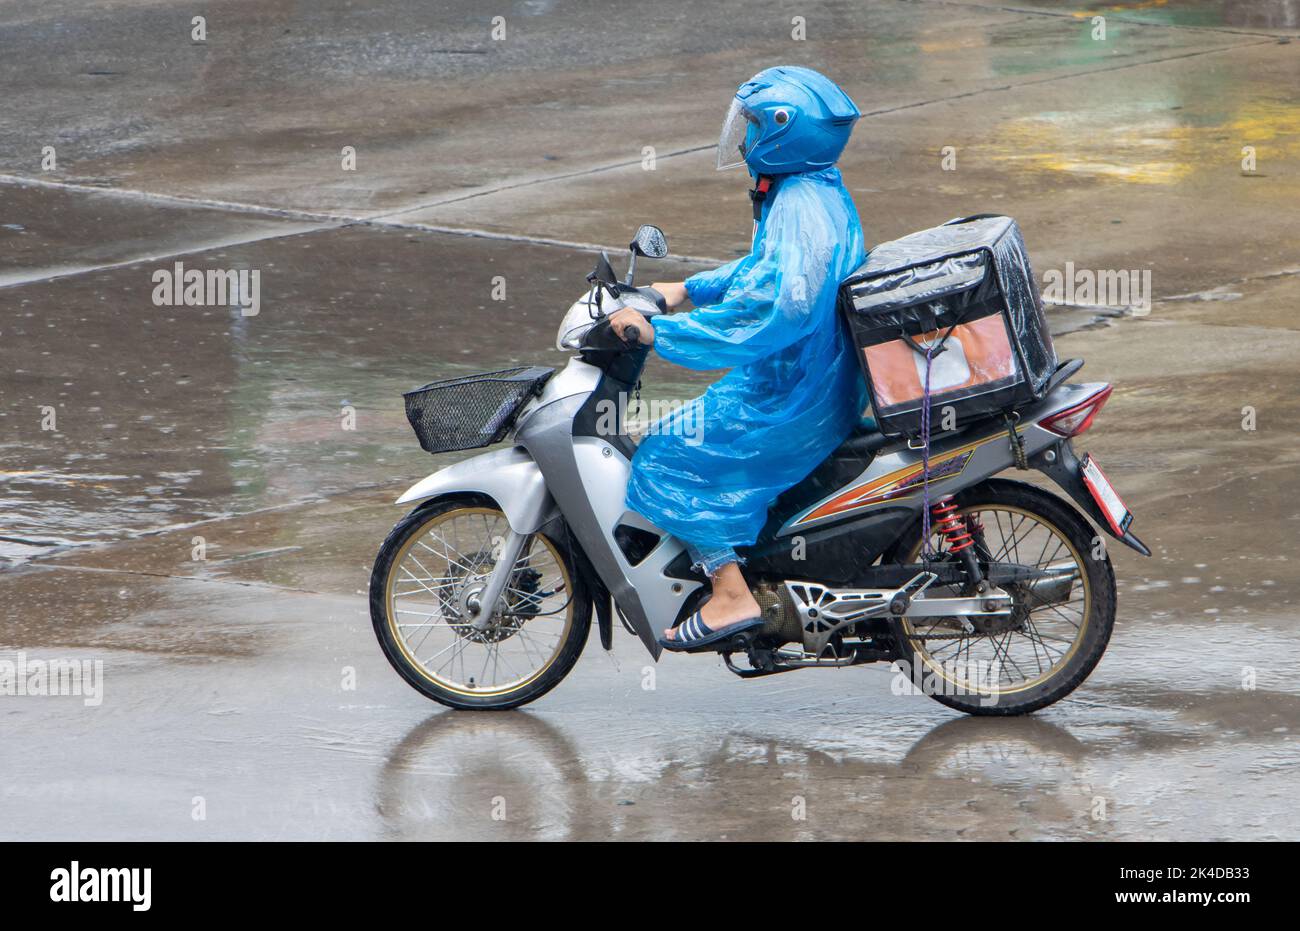 A delivery worker rides a motorcycle with a delivery box at rainy weather Stock Photo